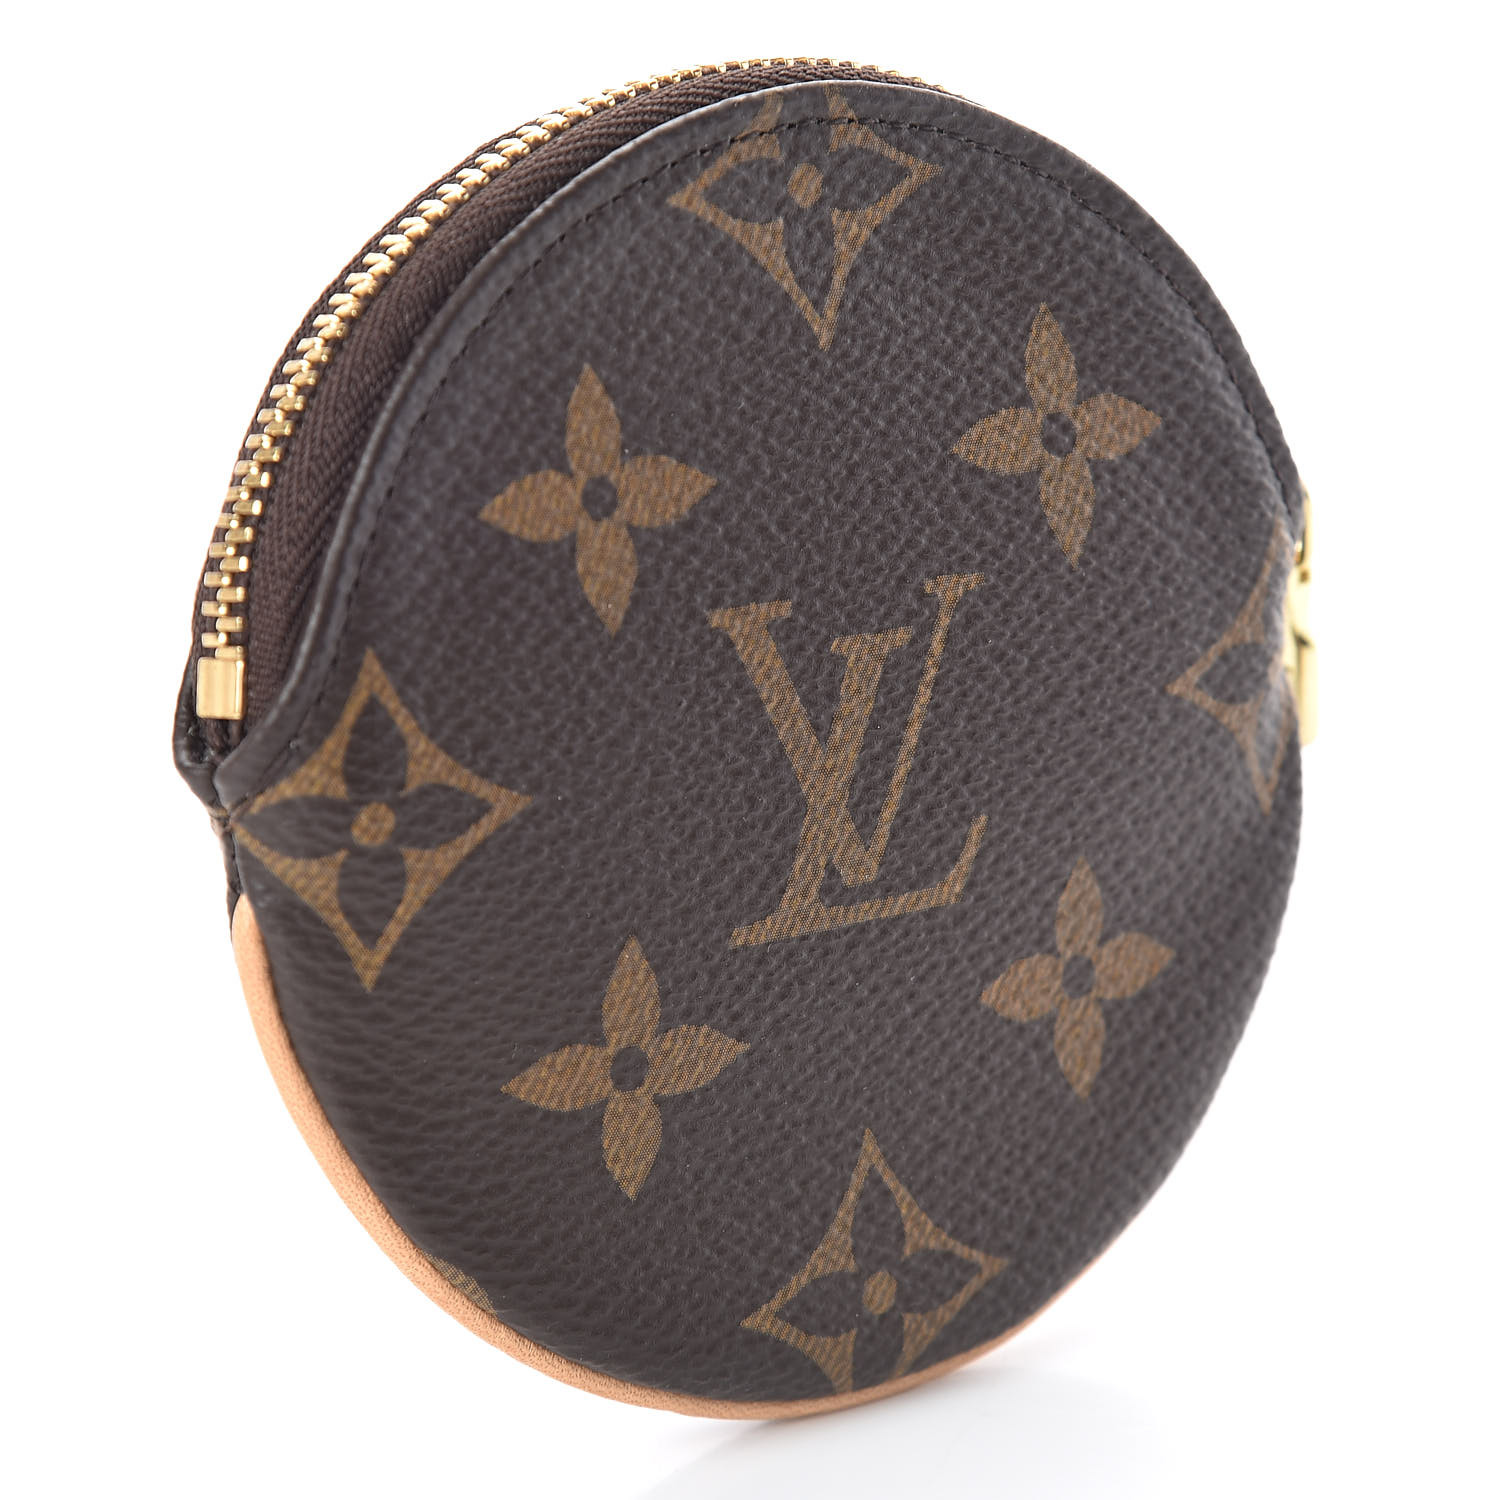 Lv Keychain Pouch Dupe  Natural Resource Department